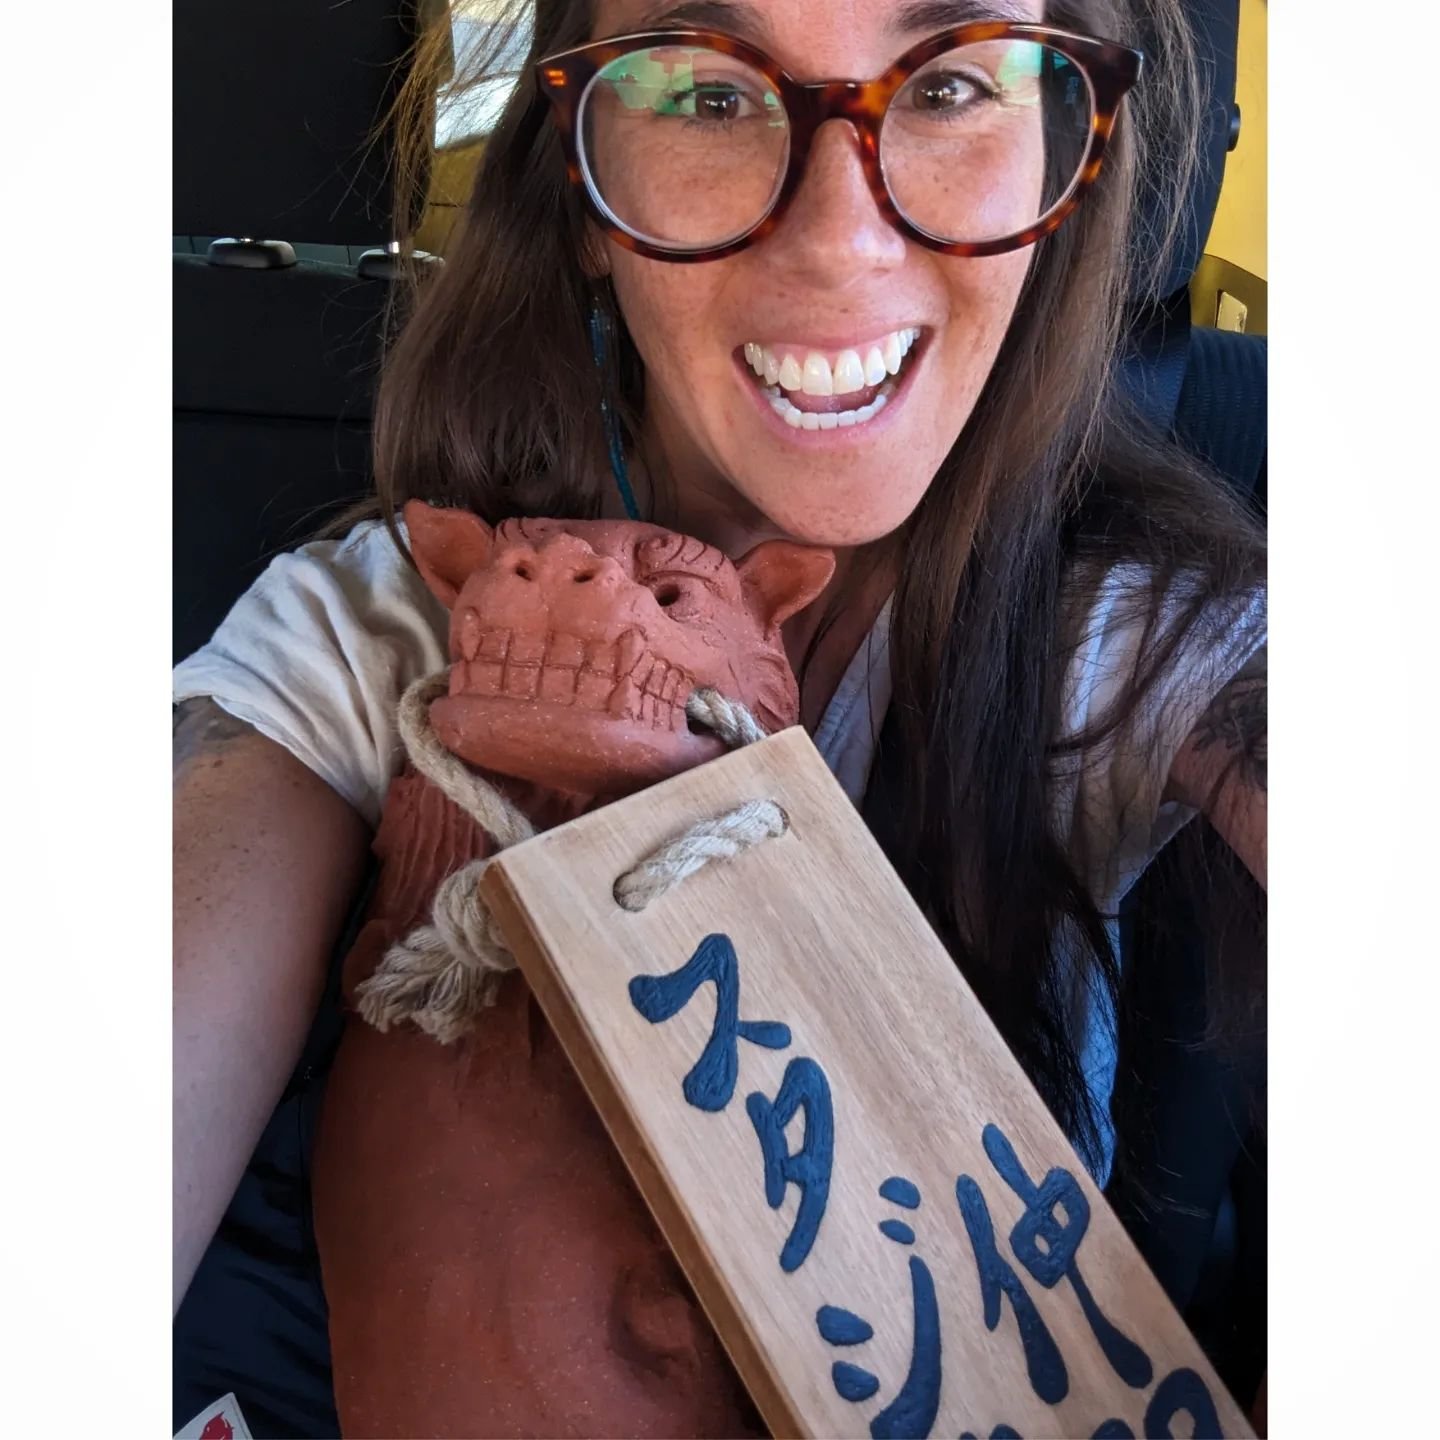 This past weekend, my husband and I packed up my pottery and road tripped to California for the Okinawa Association of America Craft Fair in Gardena! 

It was such a joy to connect with fellow Uchinaachu, share stories, and celebrate our identity tog